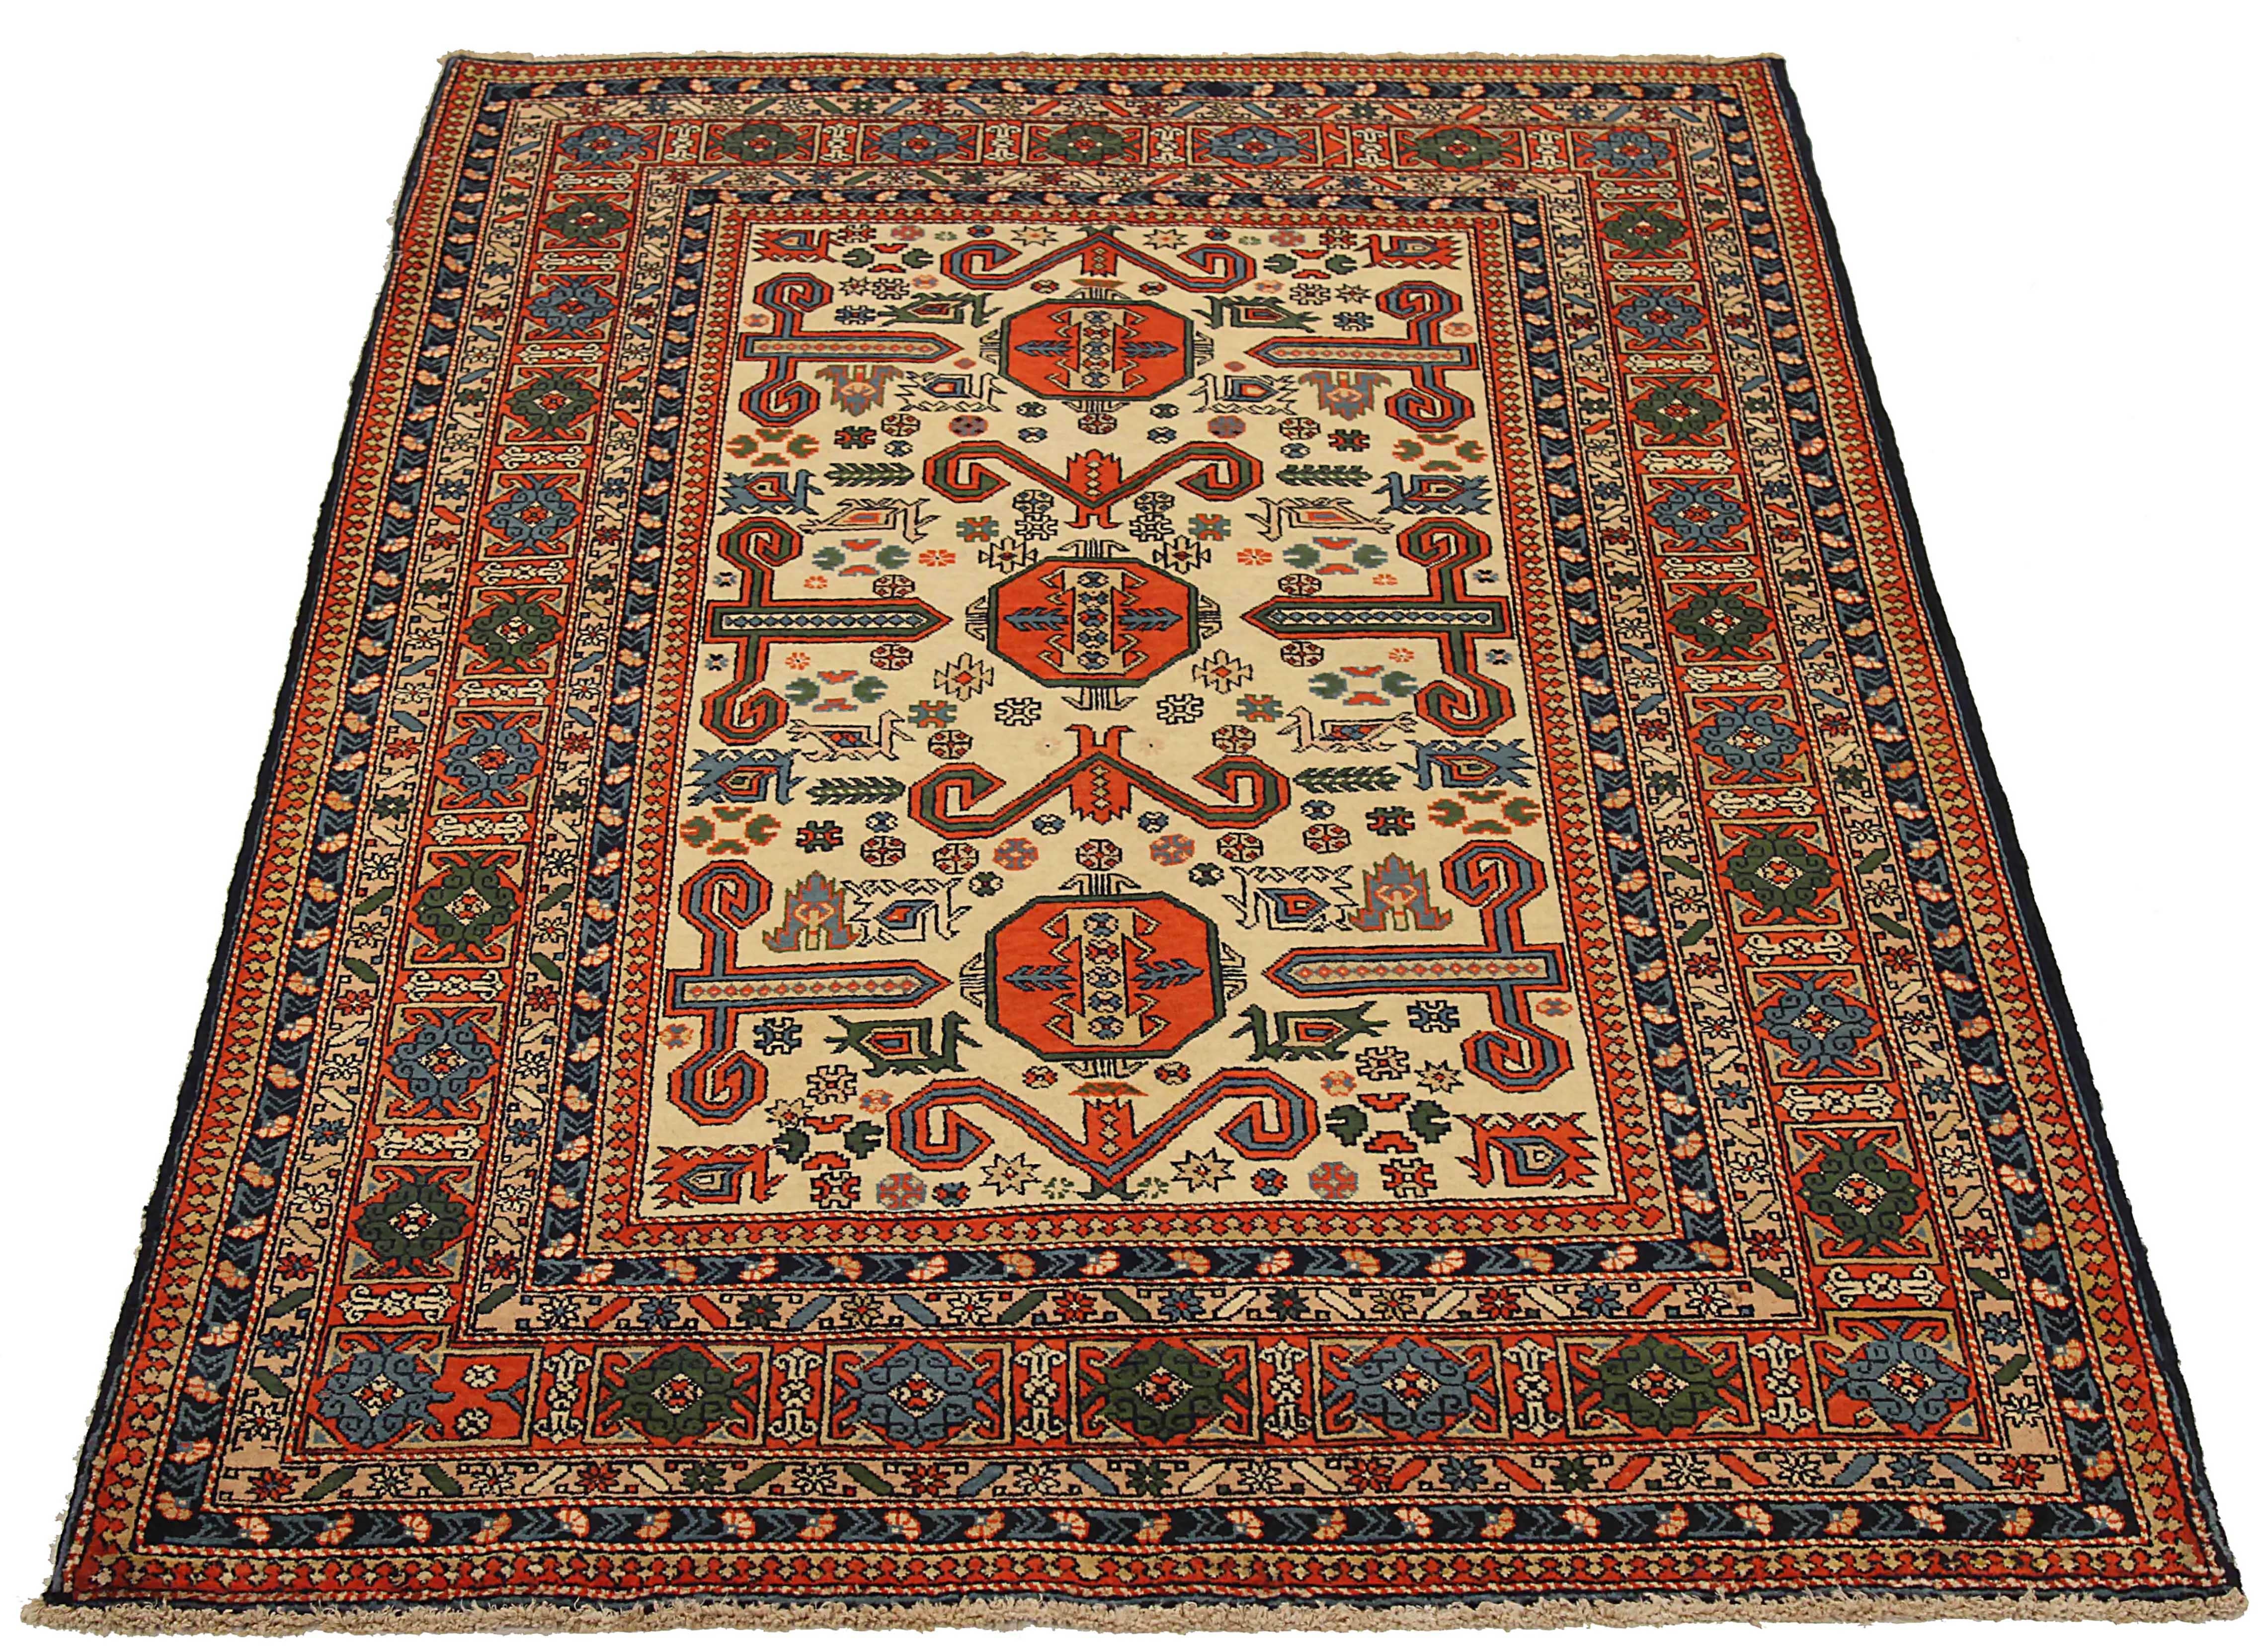 Antique Russian area rug handwoven from the finest sheep’s wool. It’s colored with all-natural vegetable dyes that are safe for humans and pets. It’s a traditional Azarbaijan design handwoven by expert artisans. It’s a lovely area rug that can be